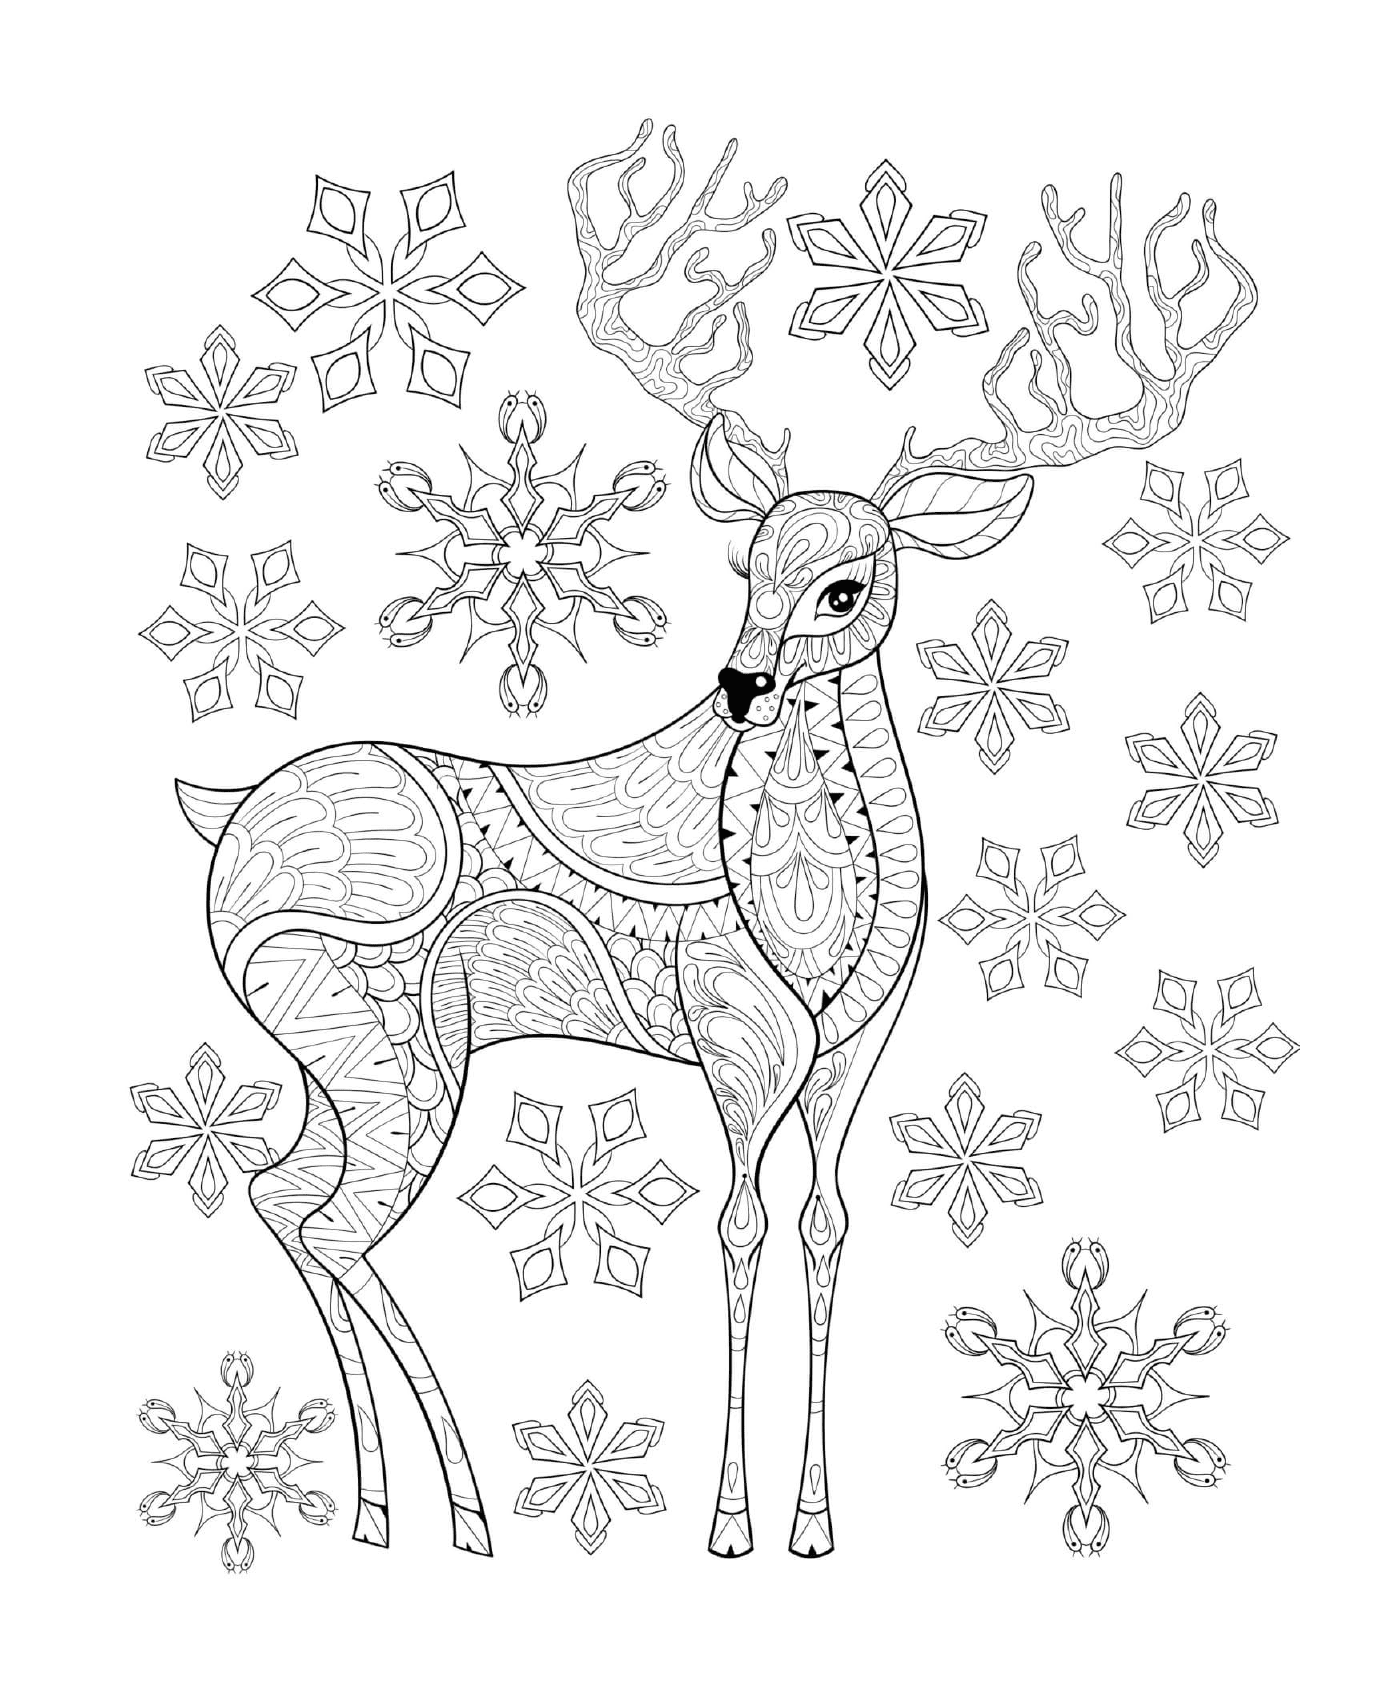  A reindeer with snowflakes 